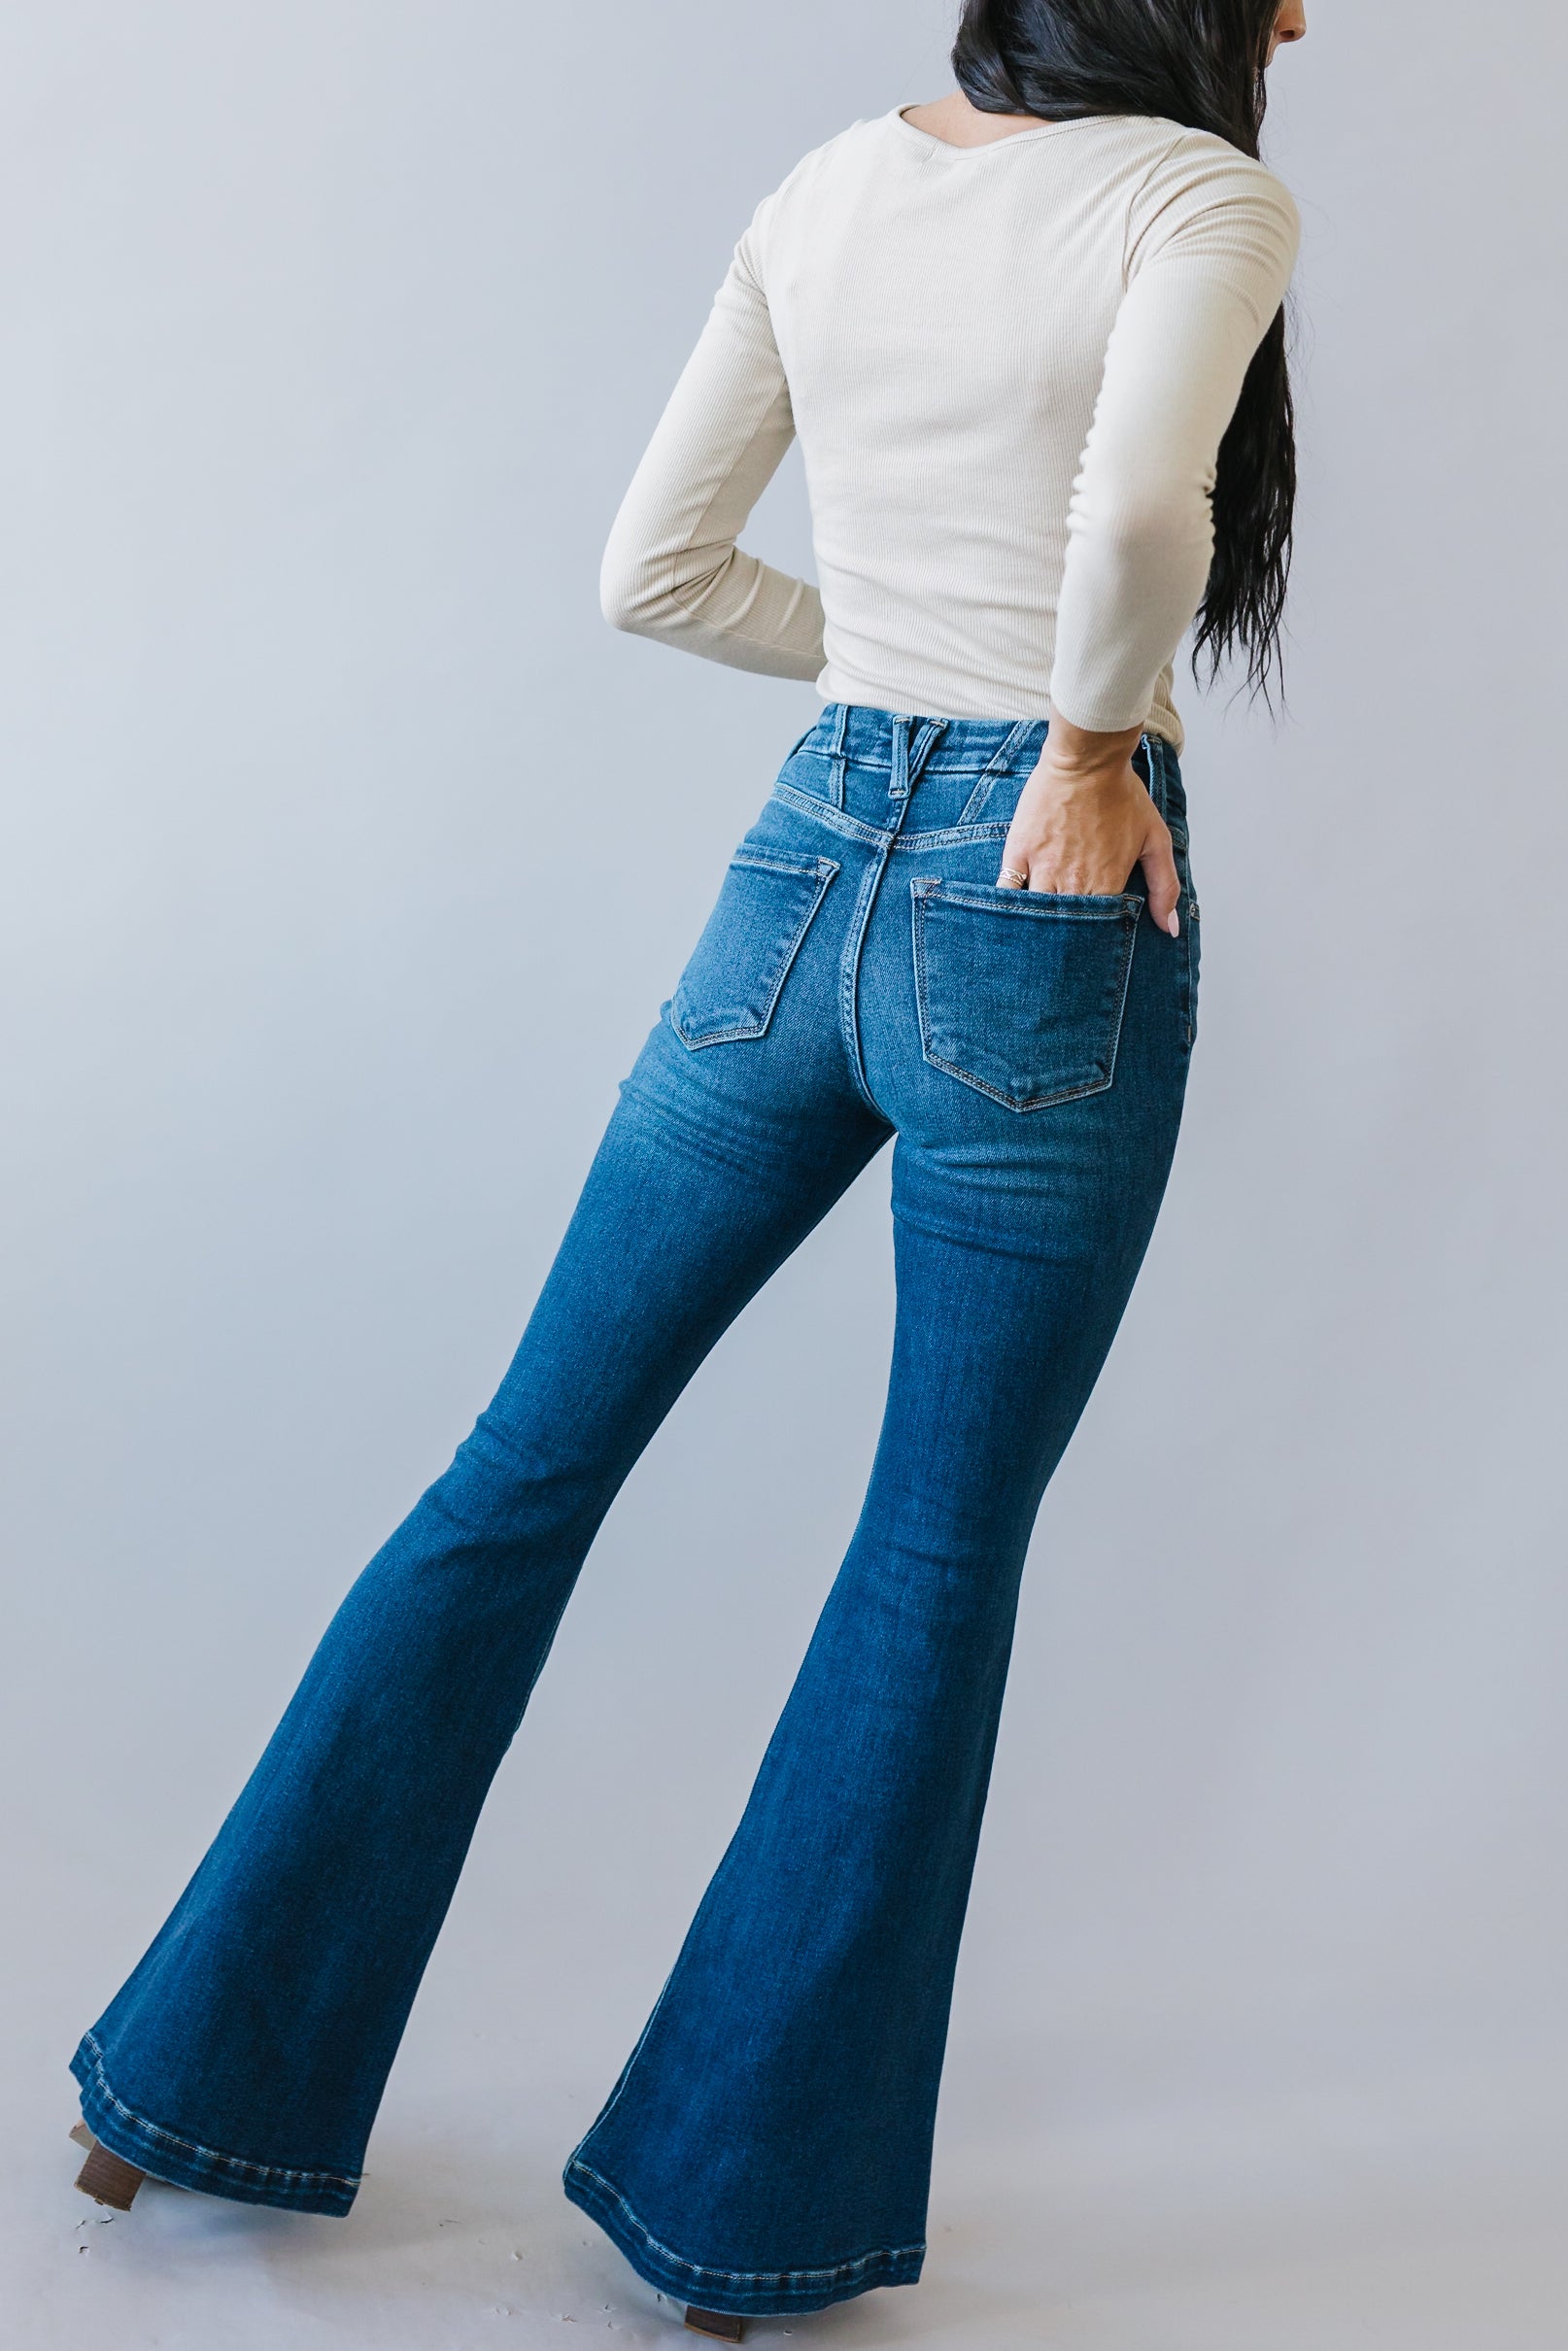 Abbey Road Super Flare Jeans by Kancan – HASHTAG DNA